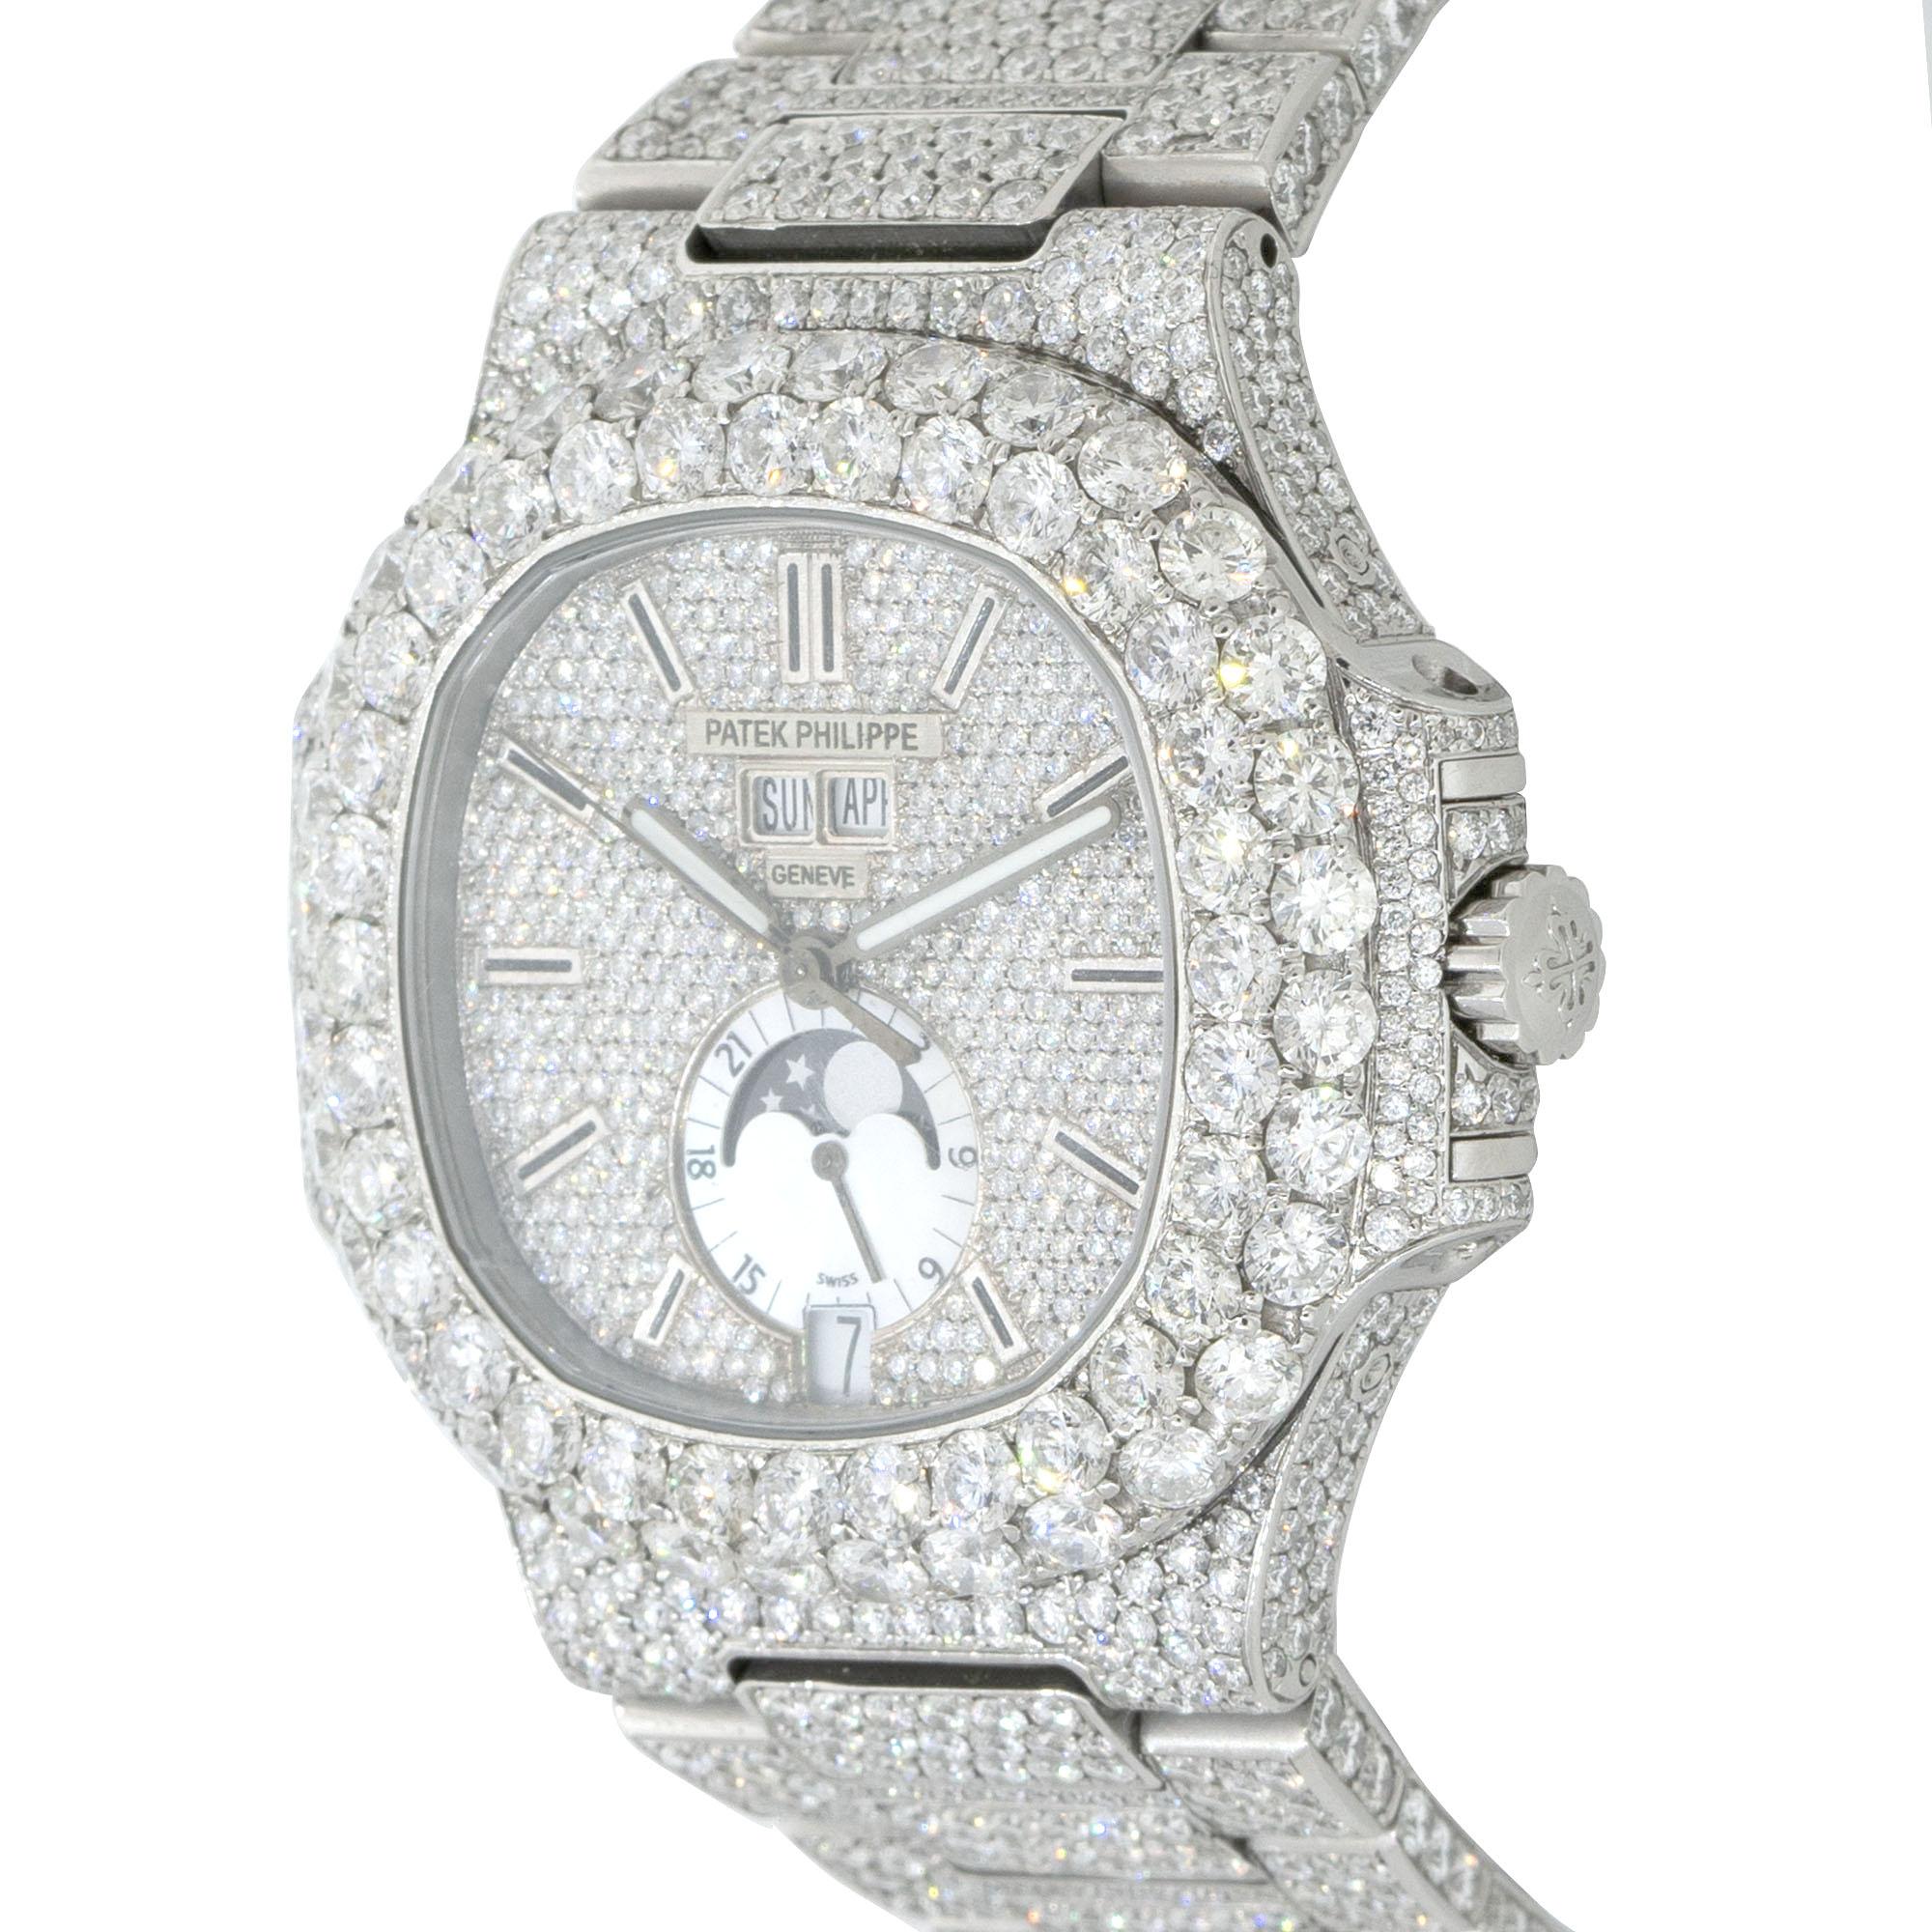 Patek Philippe Nautilus Stainless Steel All Diamond Moon Phase Dial Watch In New Condition For Sale In Boca Raton, FL